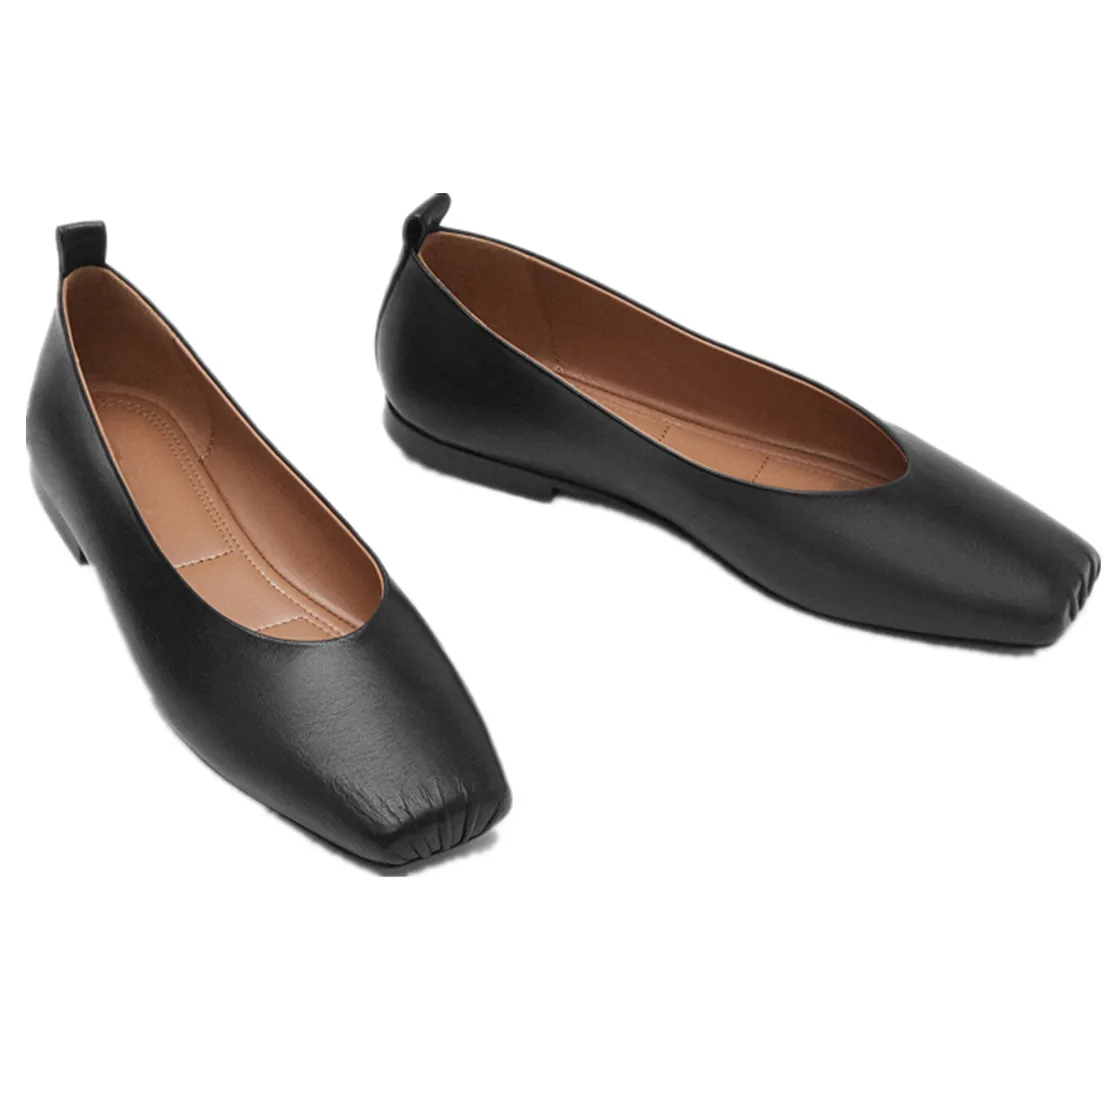 Jenny&Dave French Style Vintage Square Toe Mary Jane Shoes Casual Slip-On Loafers Women Genuine Leather Flat Shoe